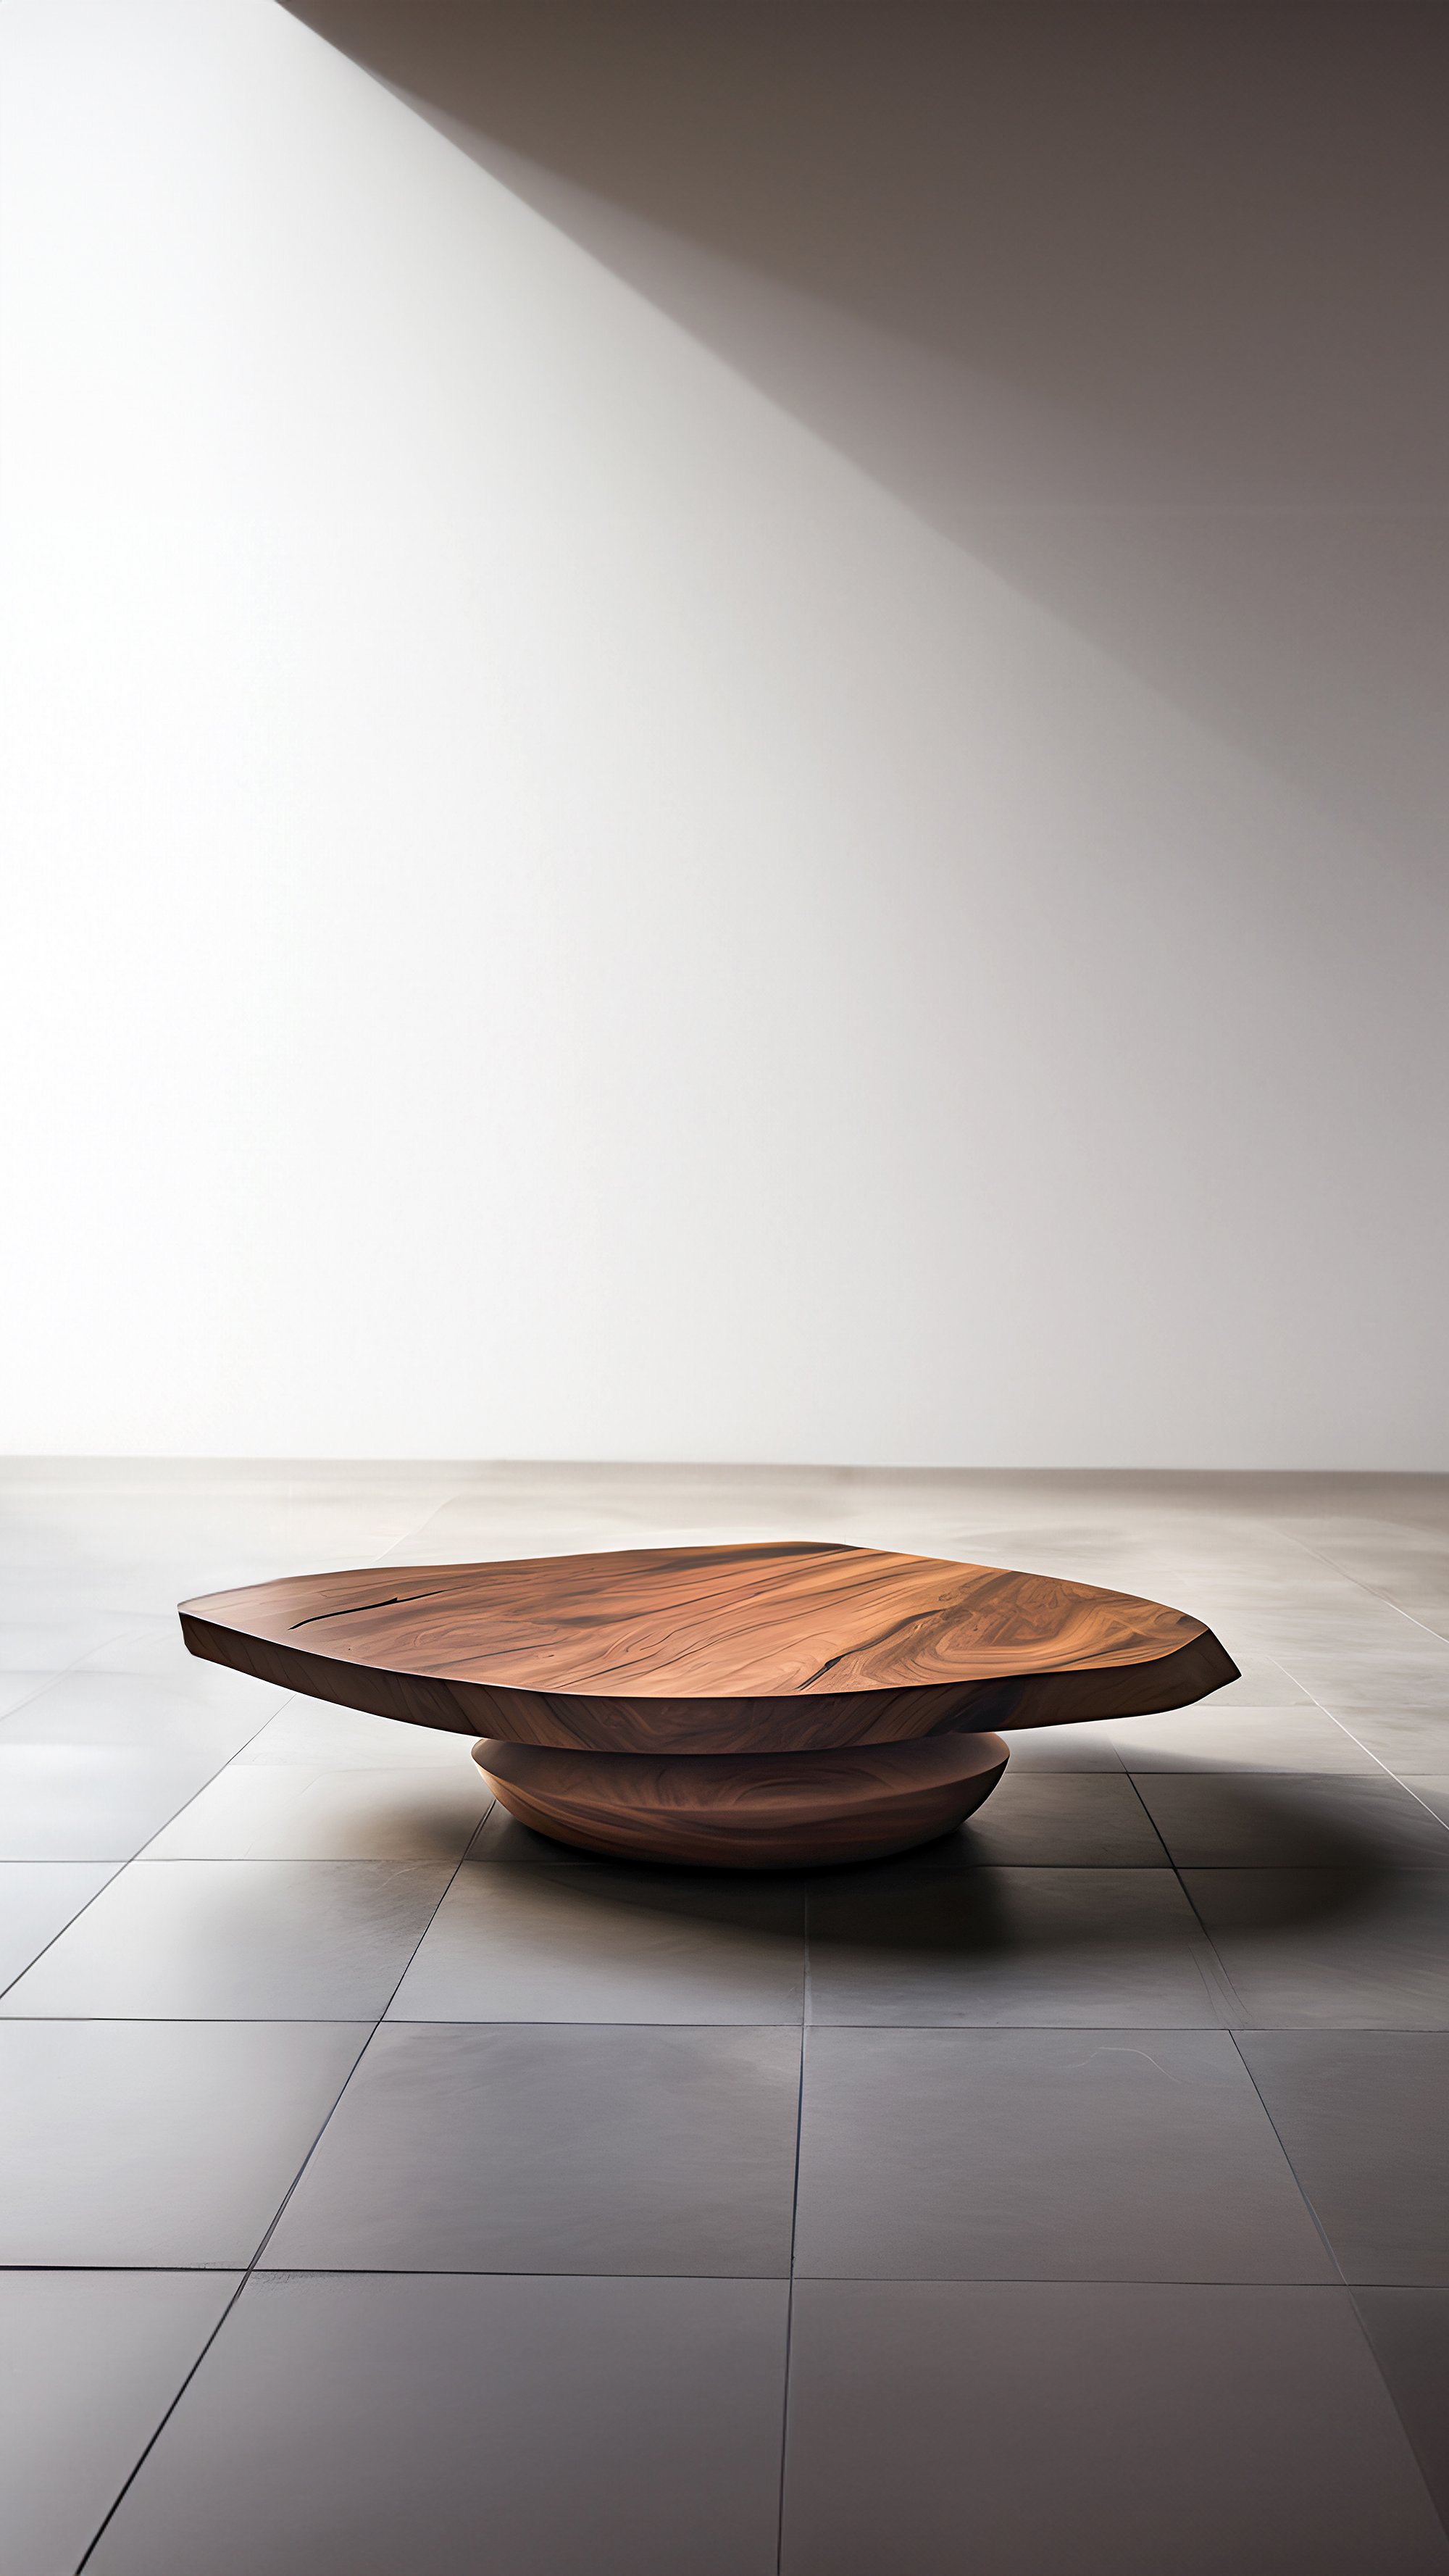 Sculptural Coffee Table Made of Solid Wood, Center Table Solace S50 by Joel Escalona — 6.jpg